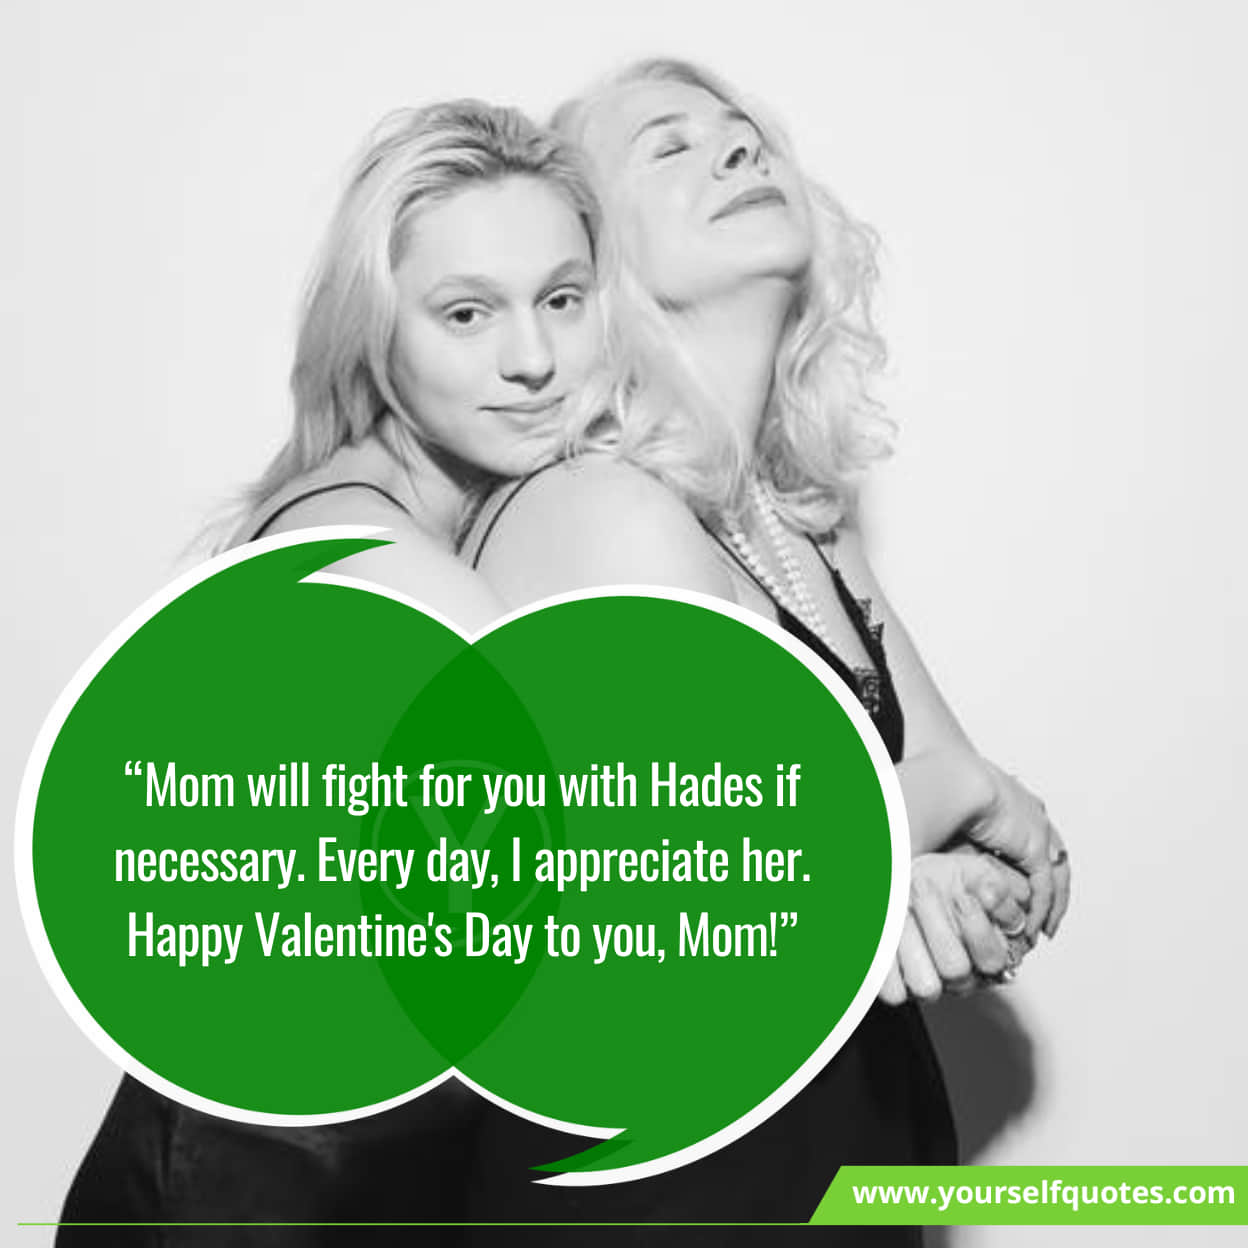 Sweet Valentine's Day Messages for Mom